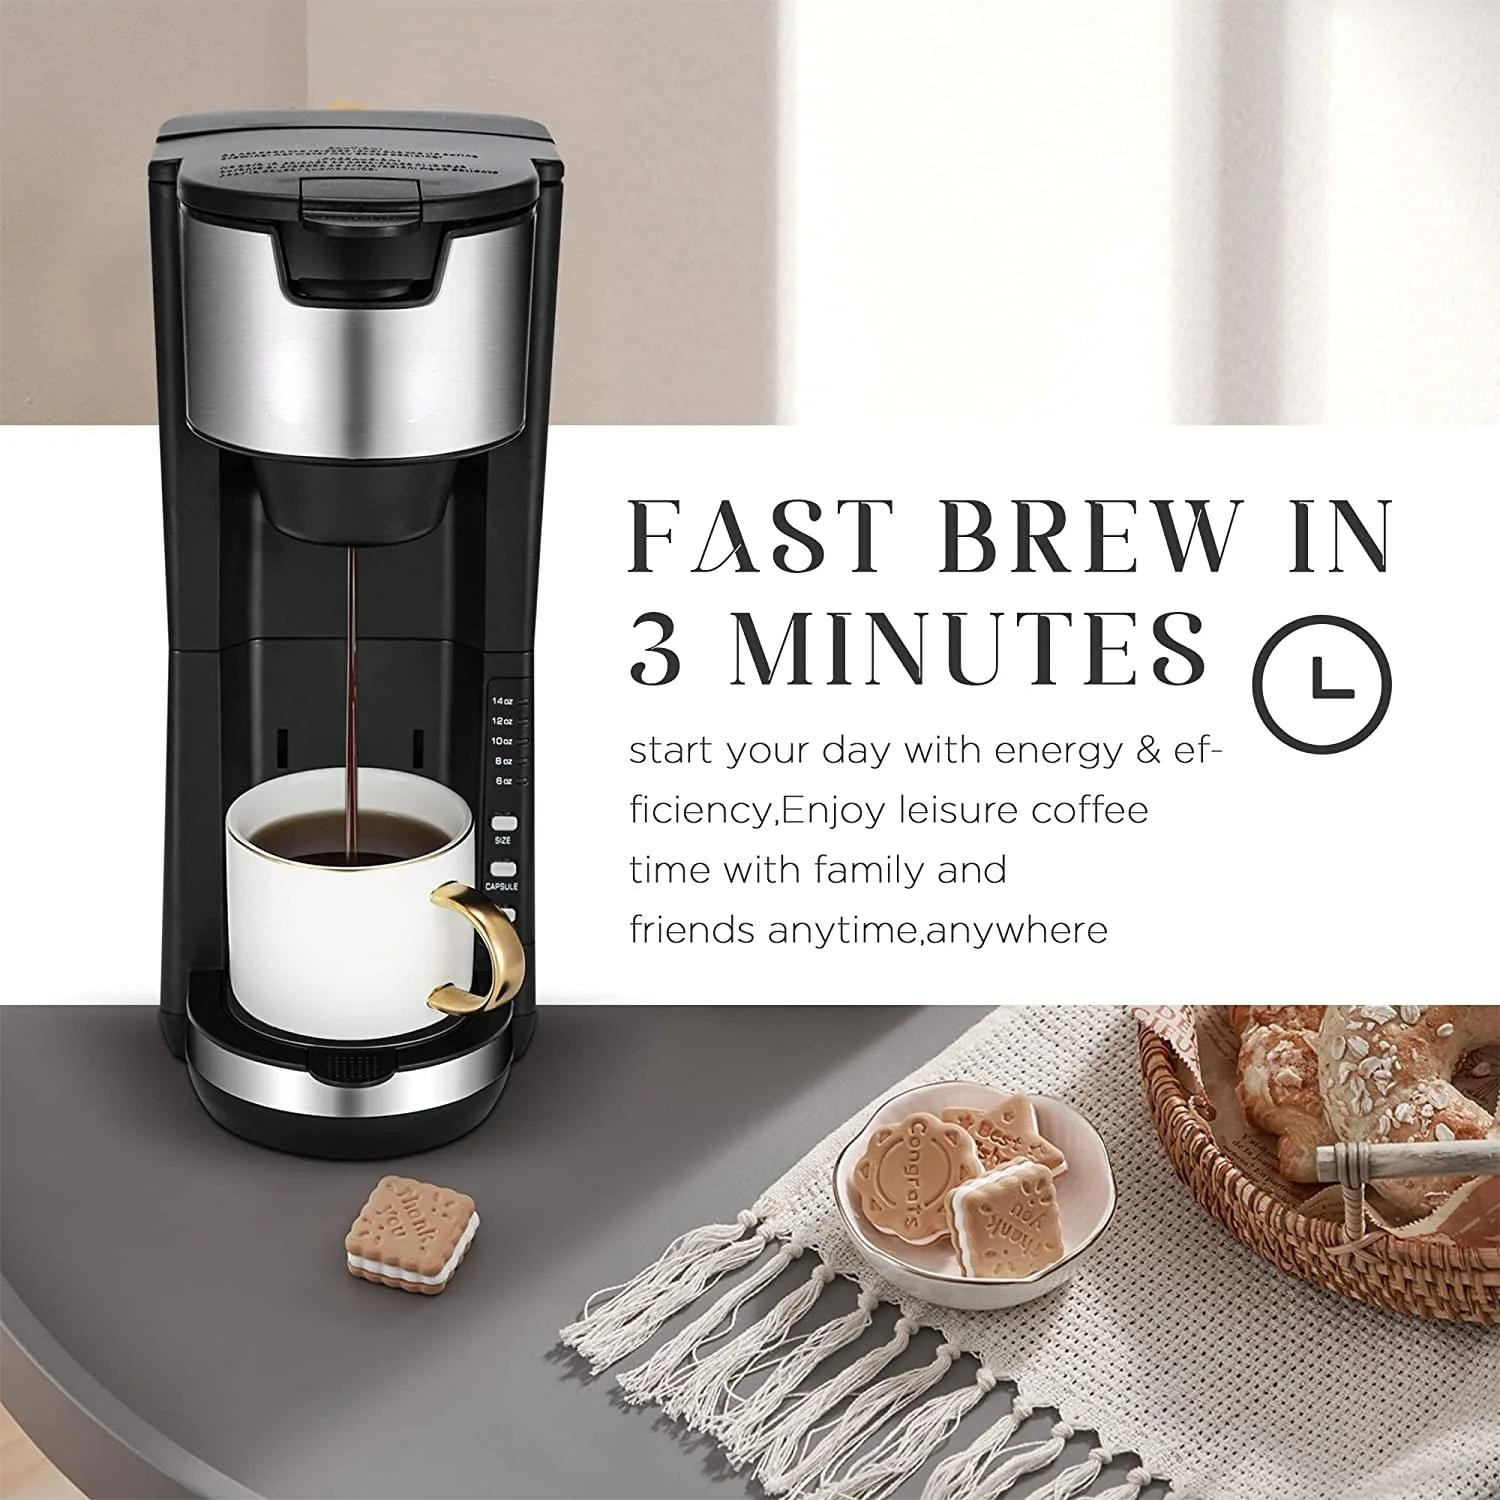 Single Serve Coffee Maker K Cup & Ground Coffee, One Cup Coffee Maker Brews 6-14 oz in 2 Mins, Pod Coffee Maker Fits Travel Mugs, with 30 oz Removable